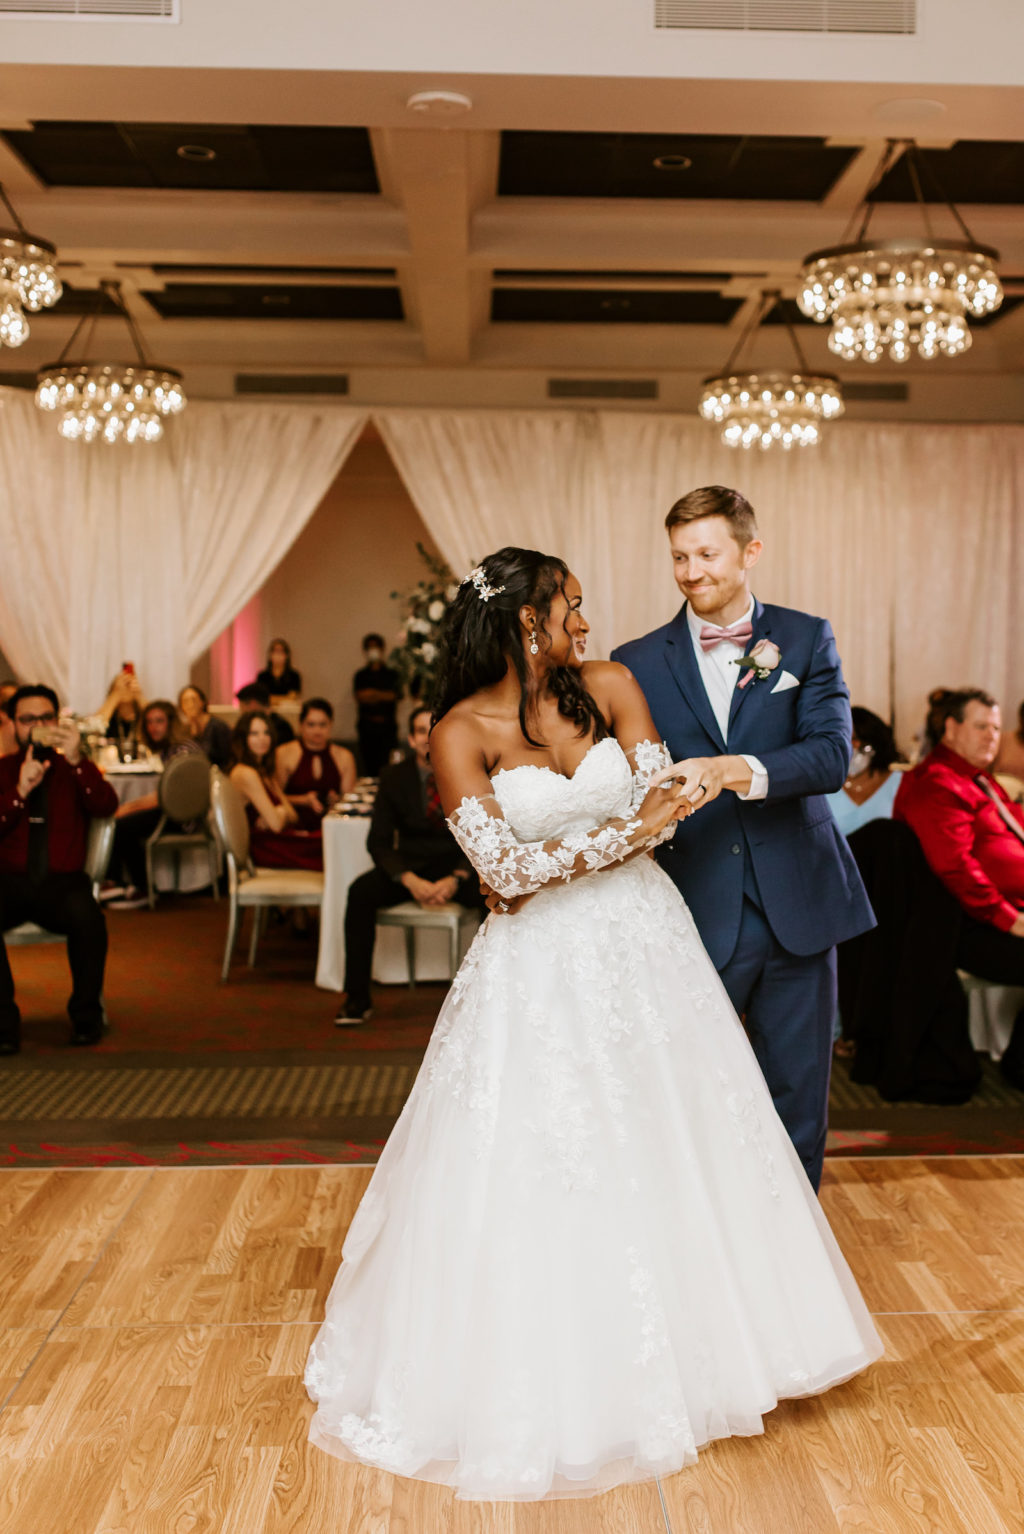 Bride and Groom First Dance Photo | Indoor Hotel Reception at St. Pete Wedding Venue The Birchwood | Tulle and Lace Ballgown Wedding Dress with Illusion Lace Sleeves and Sweetheart Neckline by Stella York | Groom Wearing Navy Blue Suit